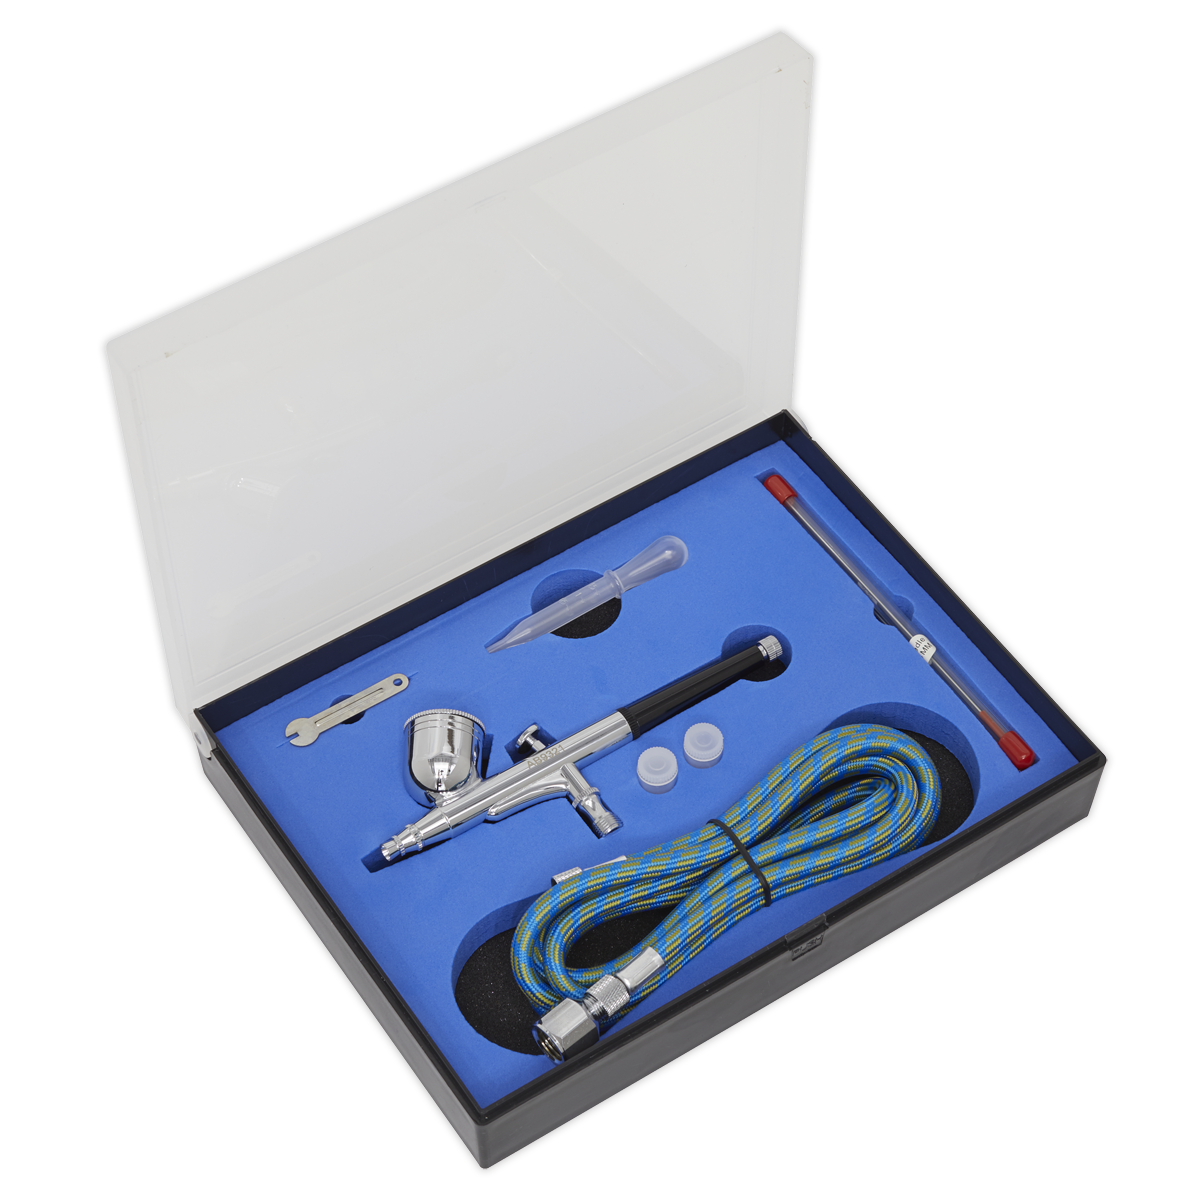 Air Brush Kit Professional without Propellant